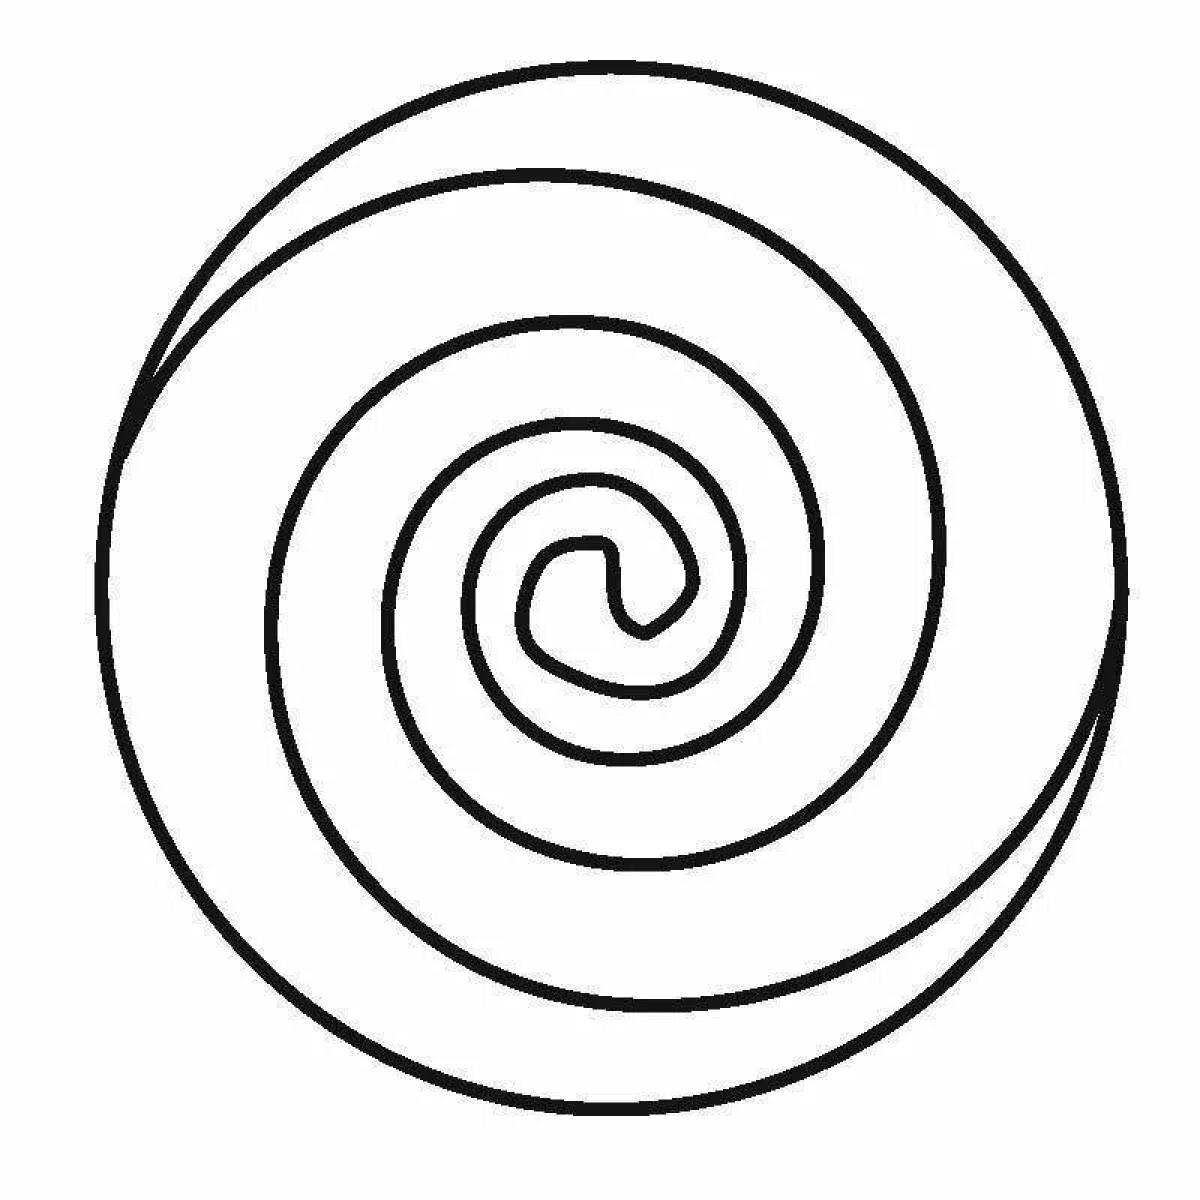 Coloring page enticing spiral environment